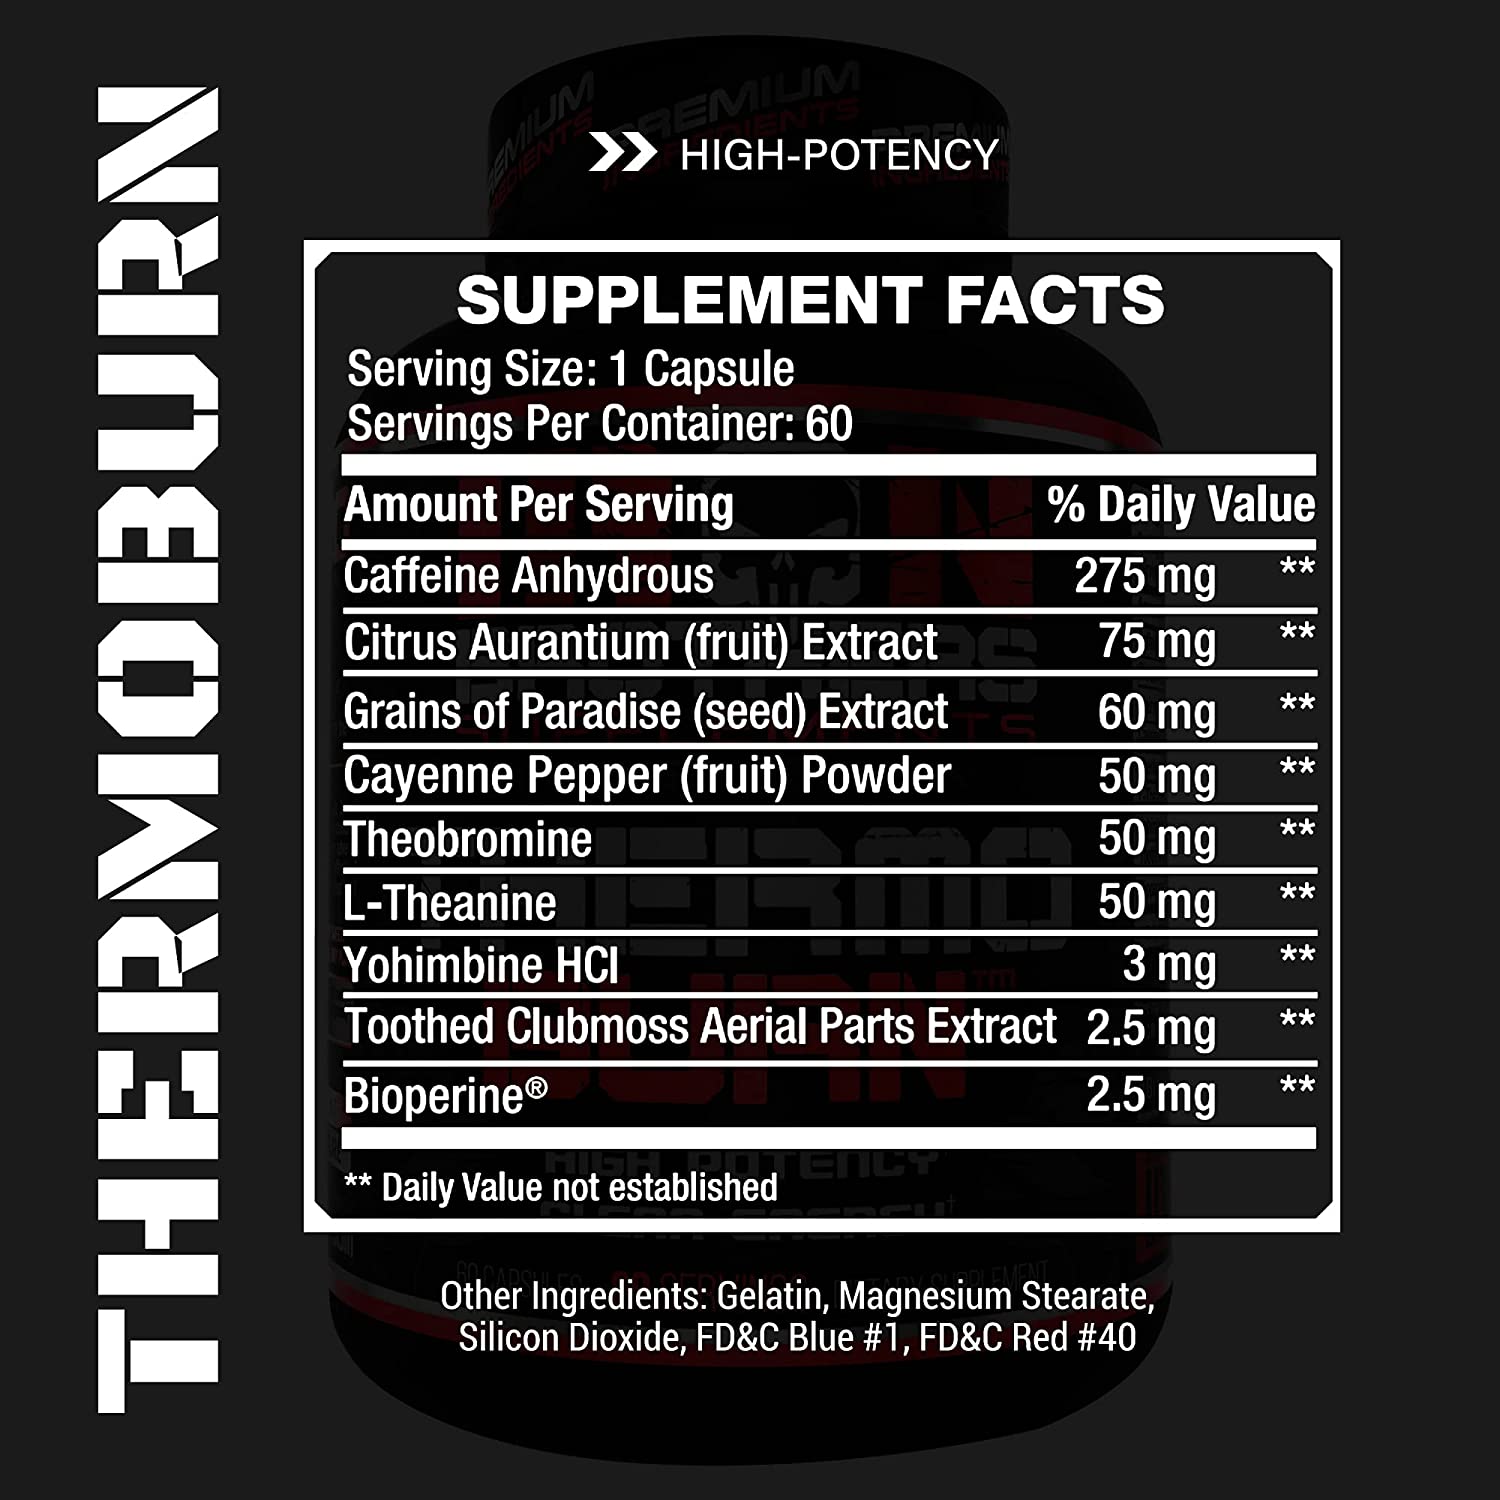 thermogenic fat burner iron brothers supplements supplement facts